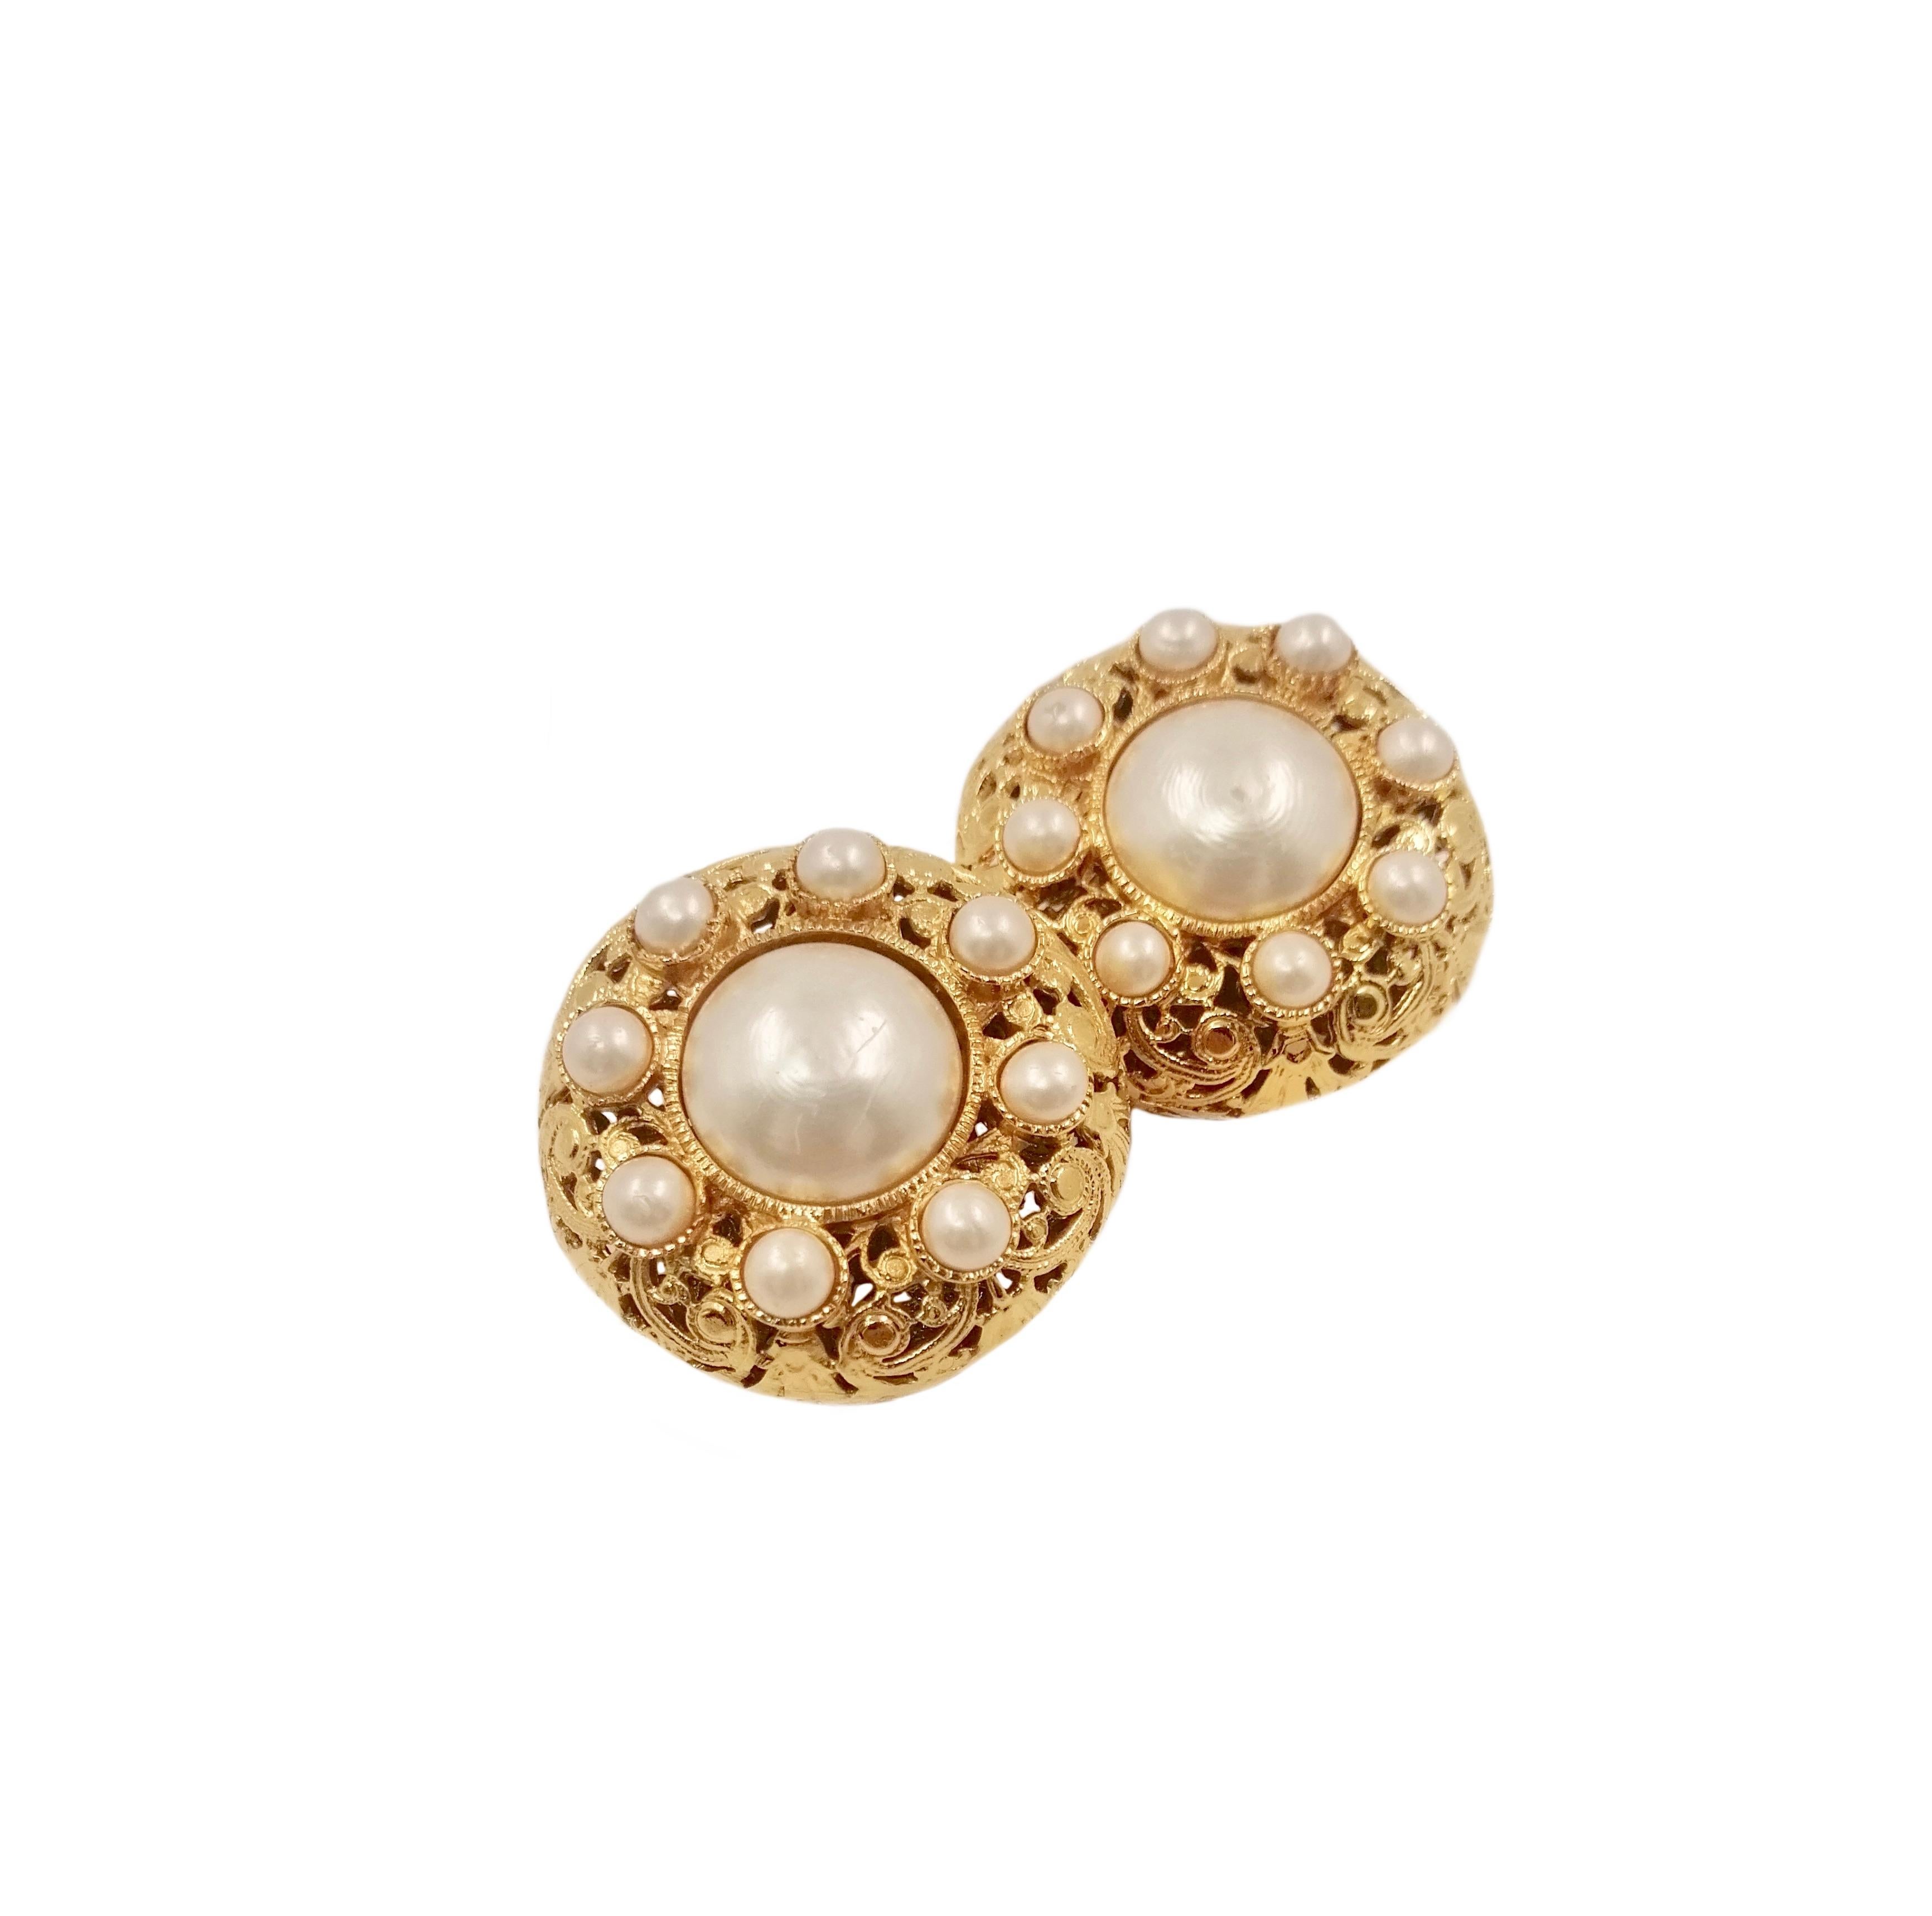 Chanel
Large lobe earrings with clips.
Golden filigree metal and pearls.
Rounded shape with clip on the back.
Mark 